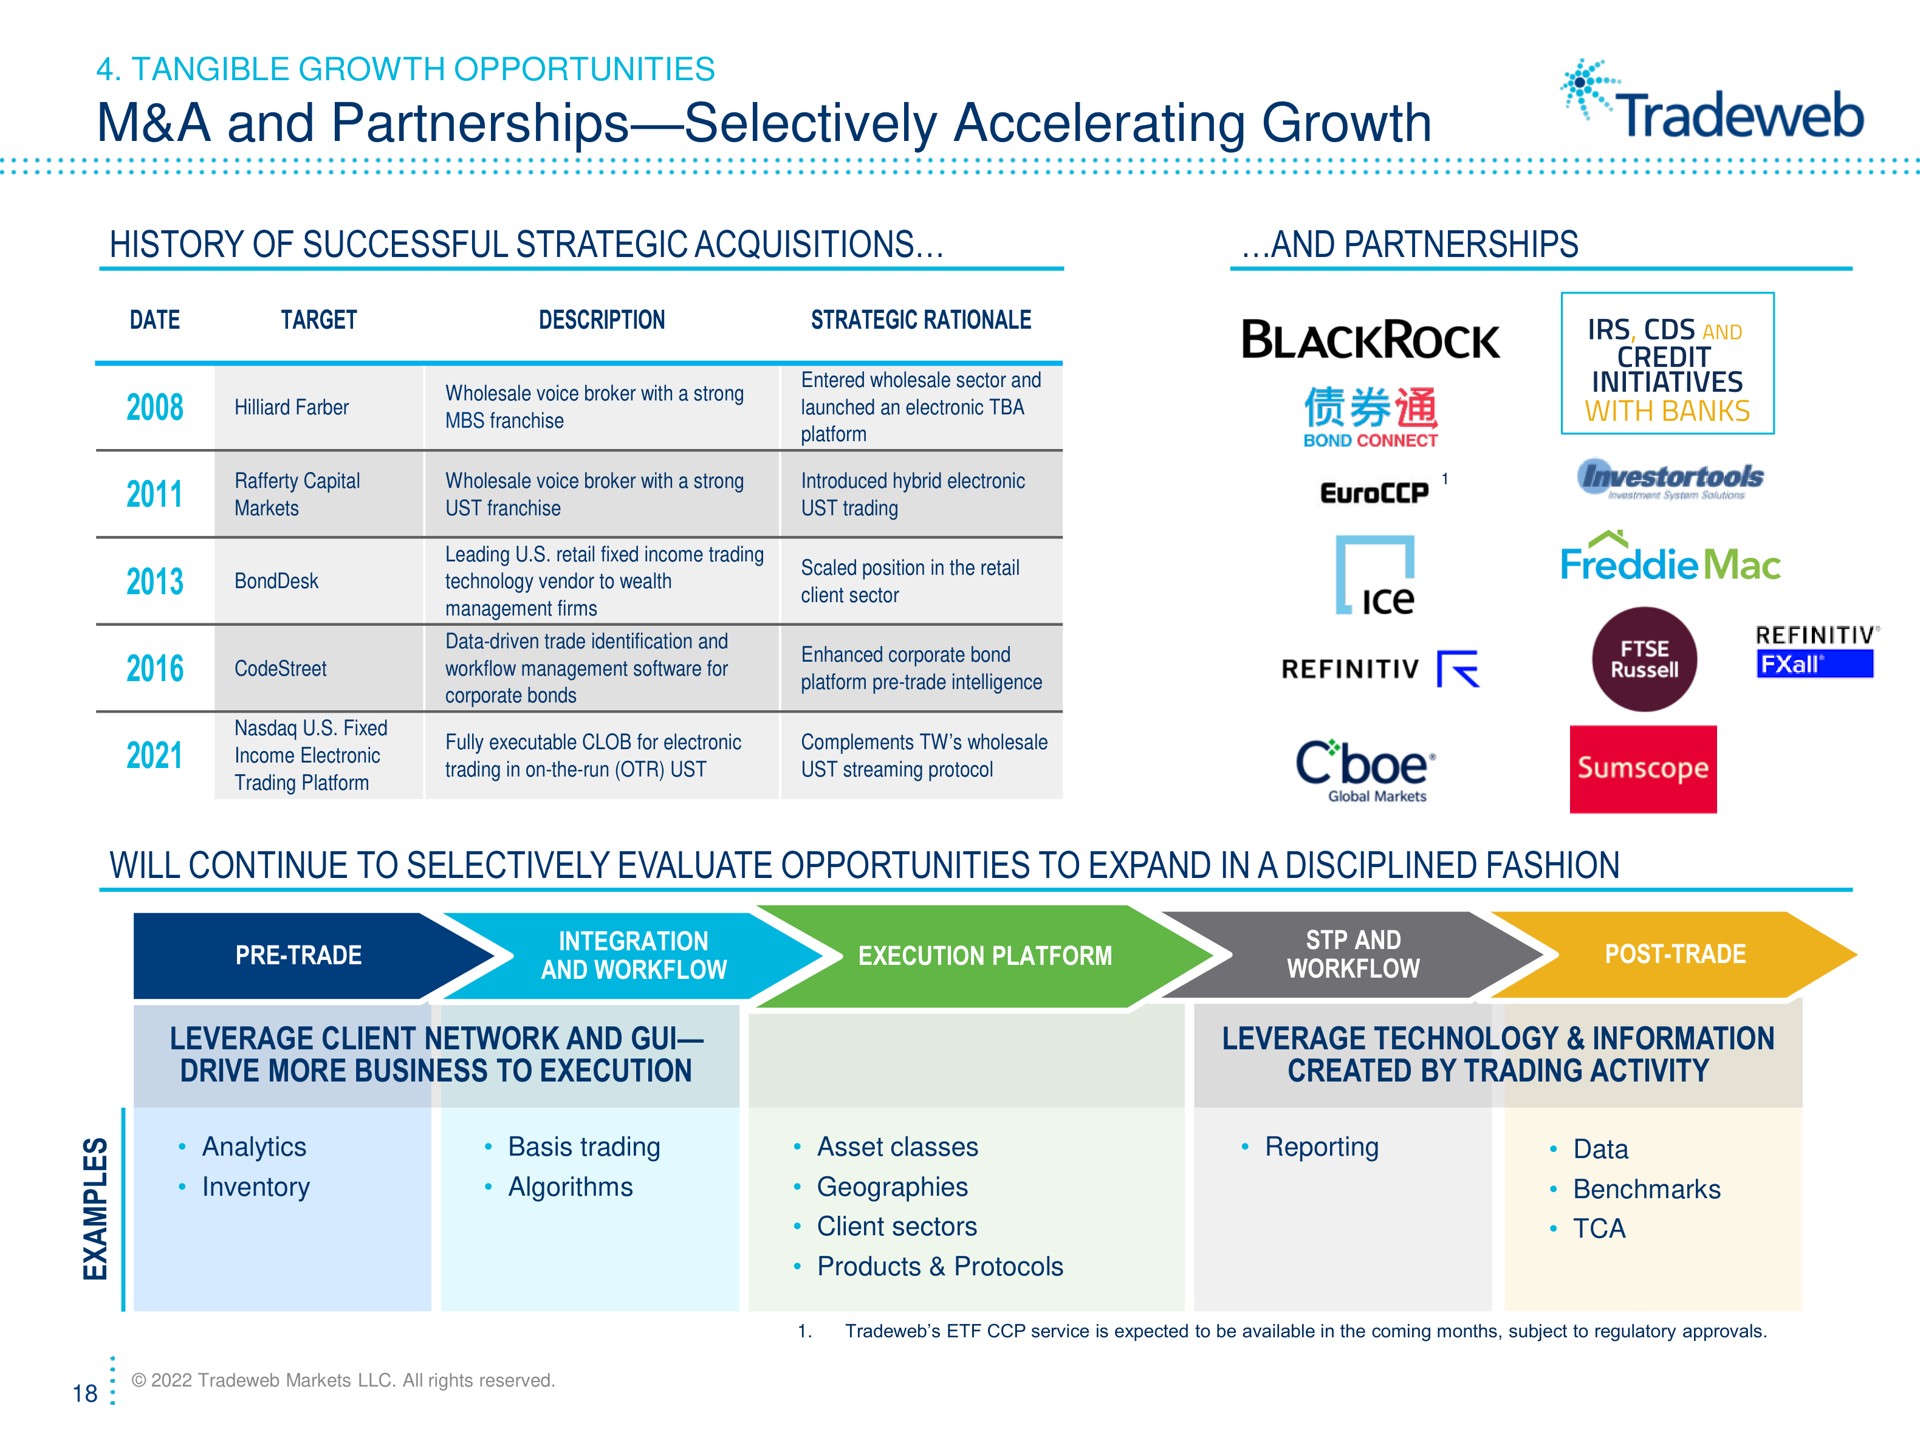 a and partnerships selectively accelerating growth history of successful strategic acquisitions and partnerships will continue to selectively evaluate opportunities to expand in a disciplined fashion tangible rationale franchise entered wholesale sector ust trading technology vendor wealth management for income electronic credit initiatives trade integration execution platform leverage client network drive more business execution analytics inventory basis trading algorithms leverage technology information created by trading activity geographies | Tradeweb